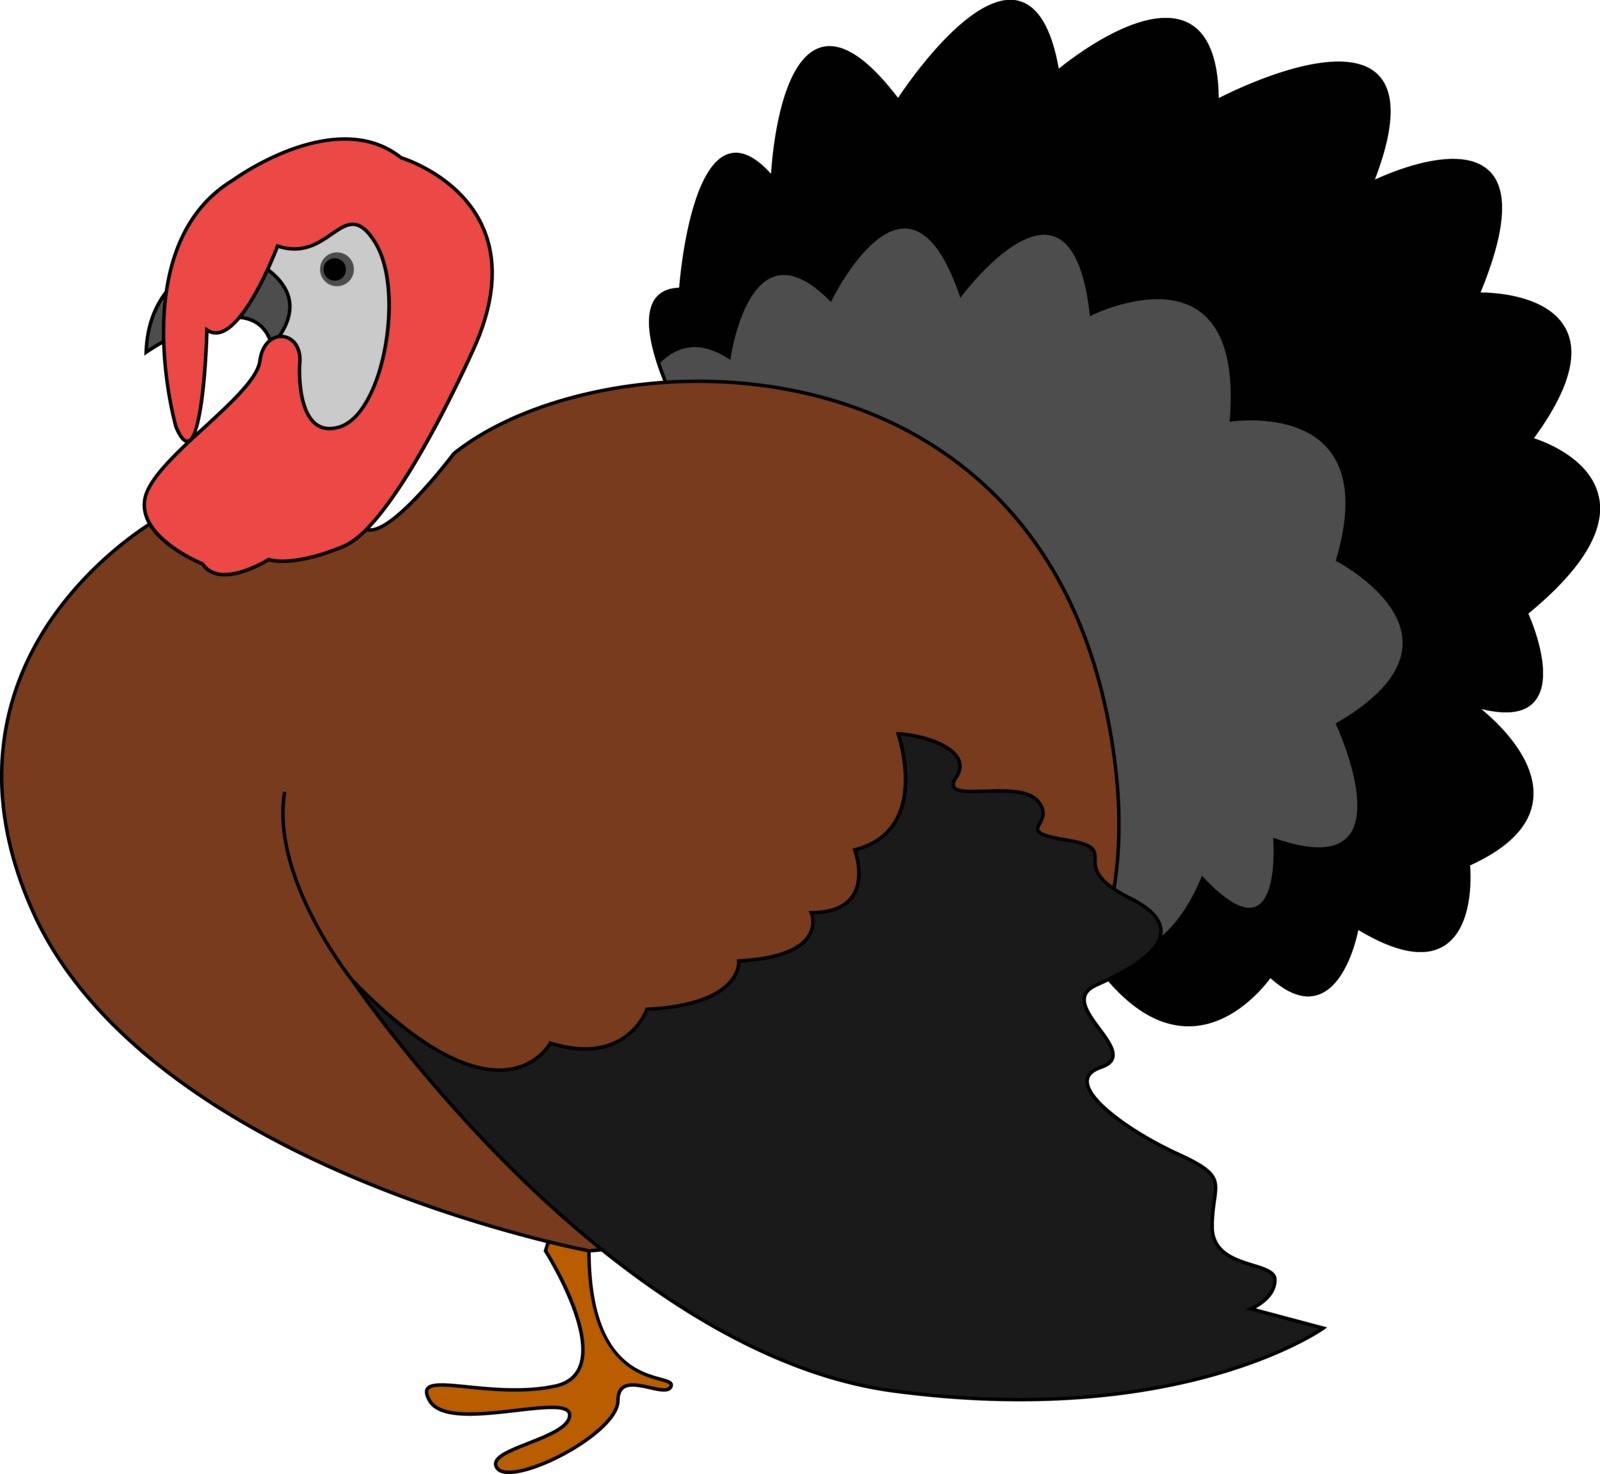 Big fat turkey, illustration, vector on white background. by Morphart